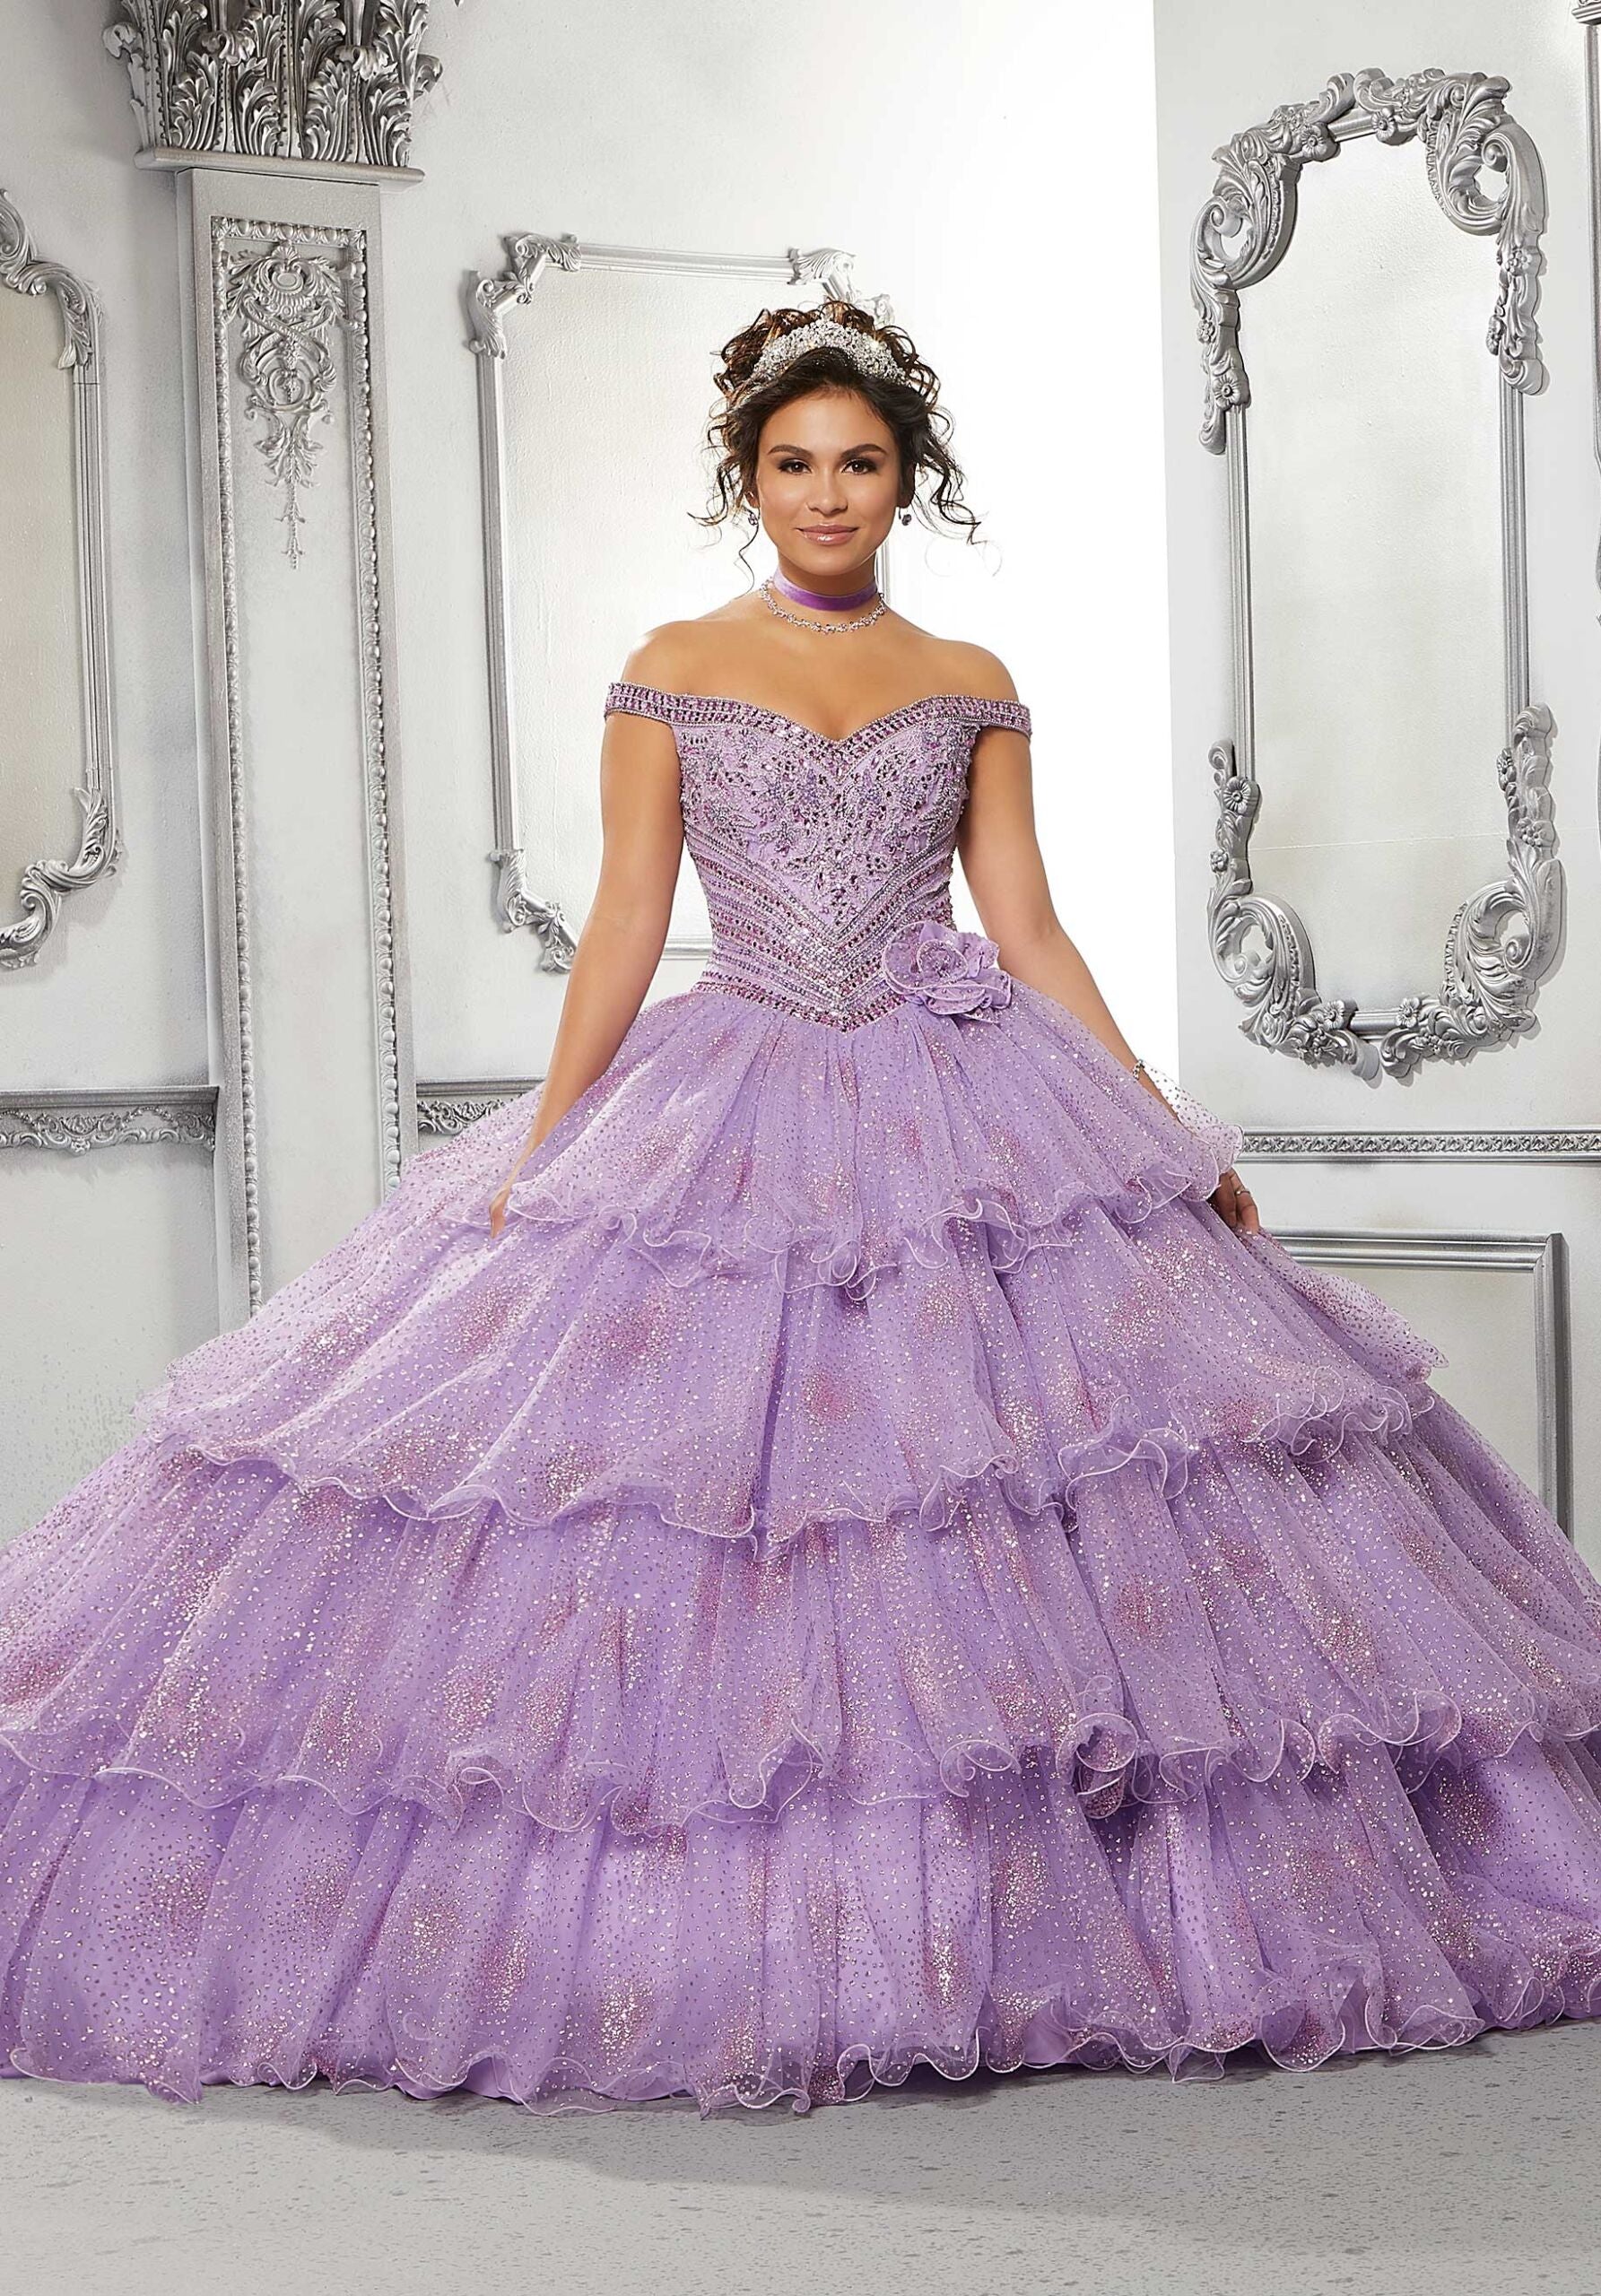 Tiered Patterned Glitter Tulle Quinceañera Dress